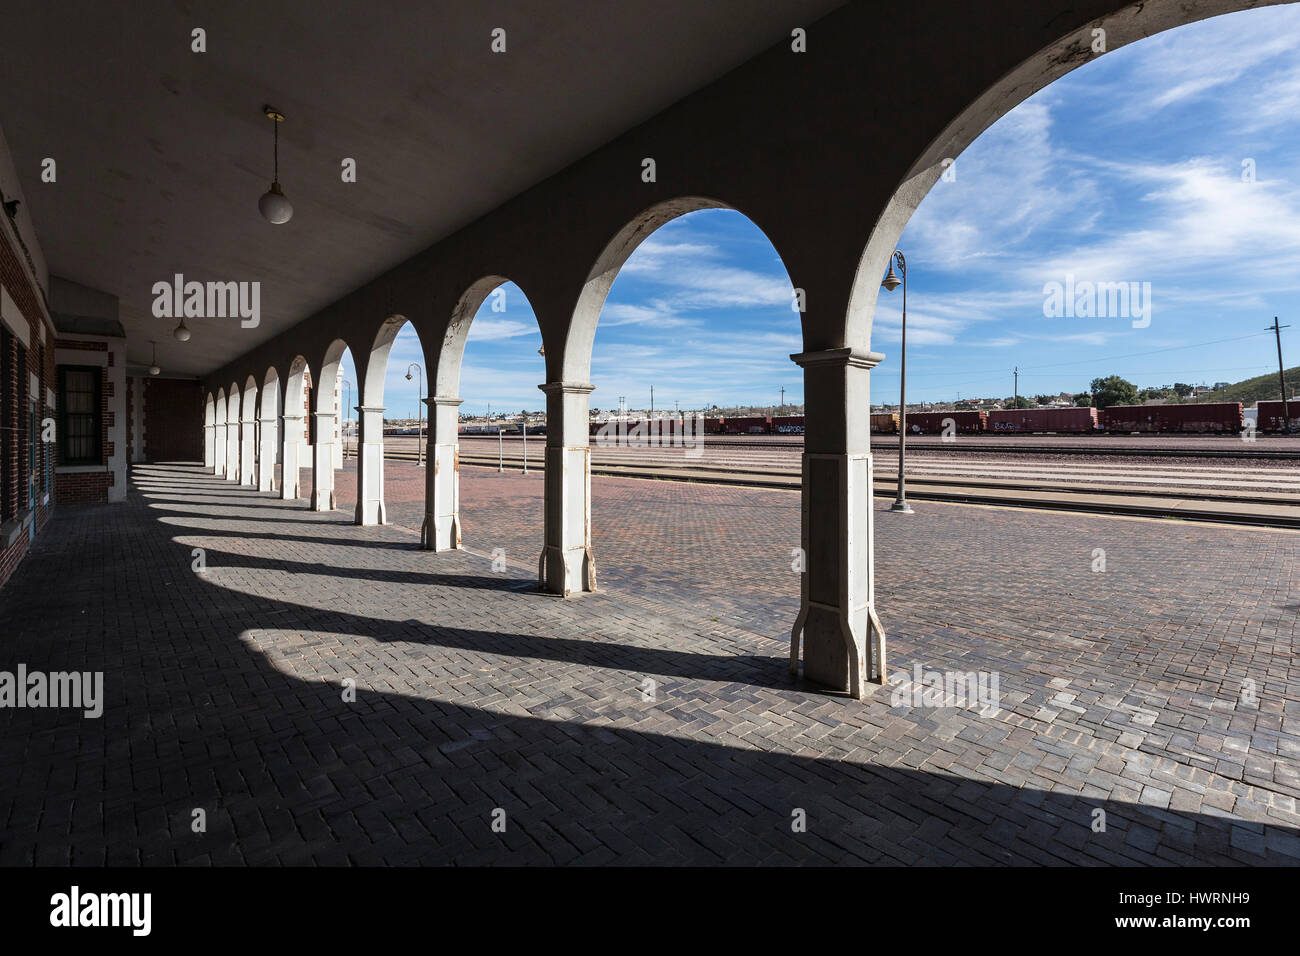 Barstow, California, USA - March 11, 2017:  View behind the arches at the historic Barstow Harvey House Train Station in the Mojave Desert. Stock Photo